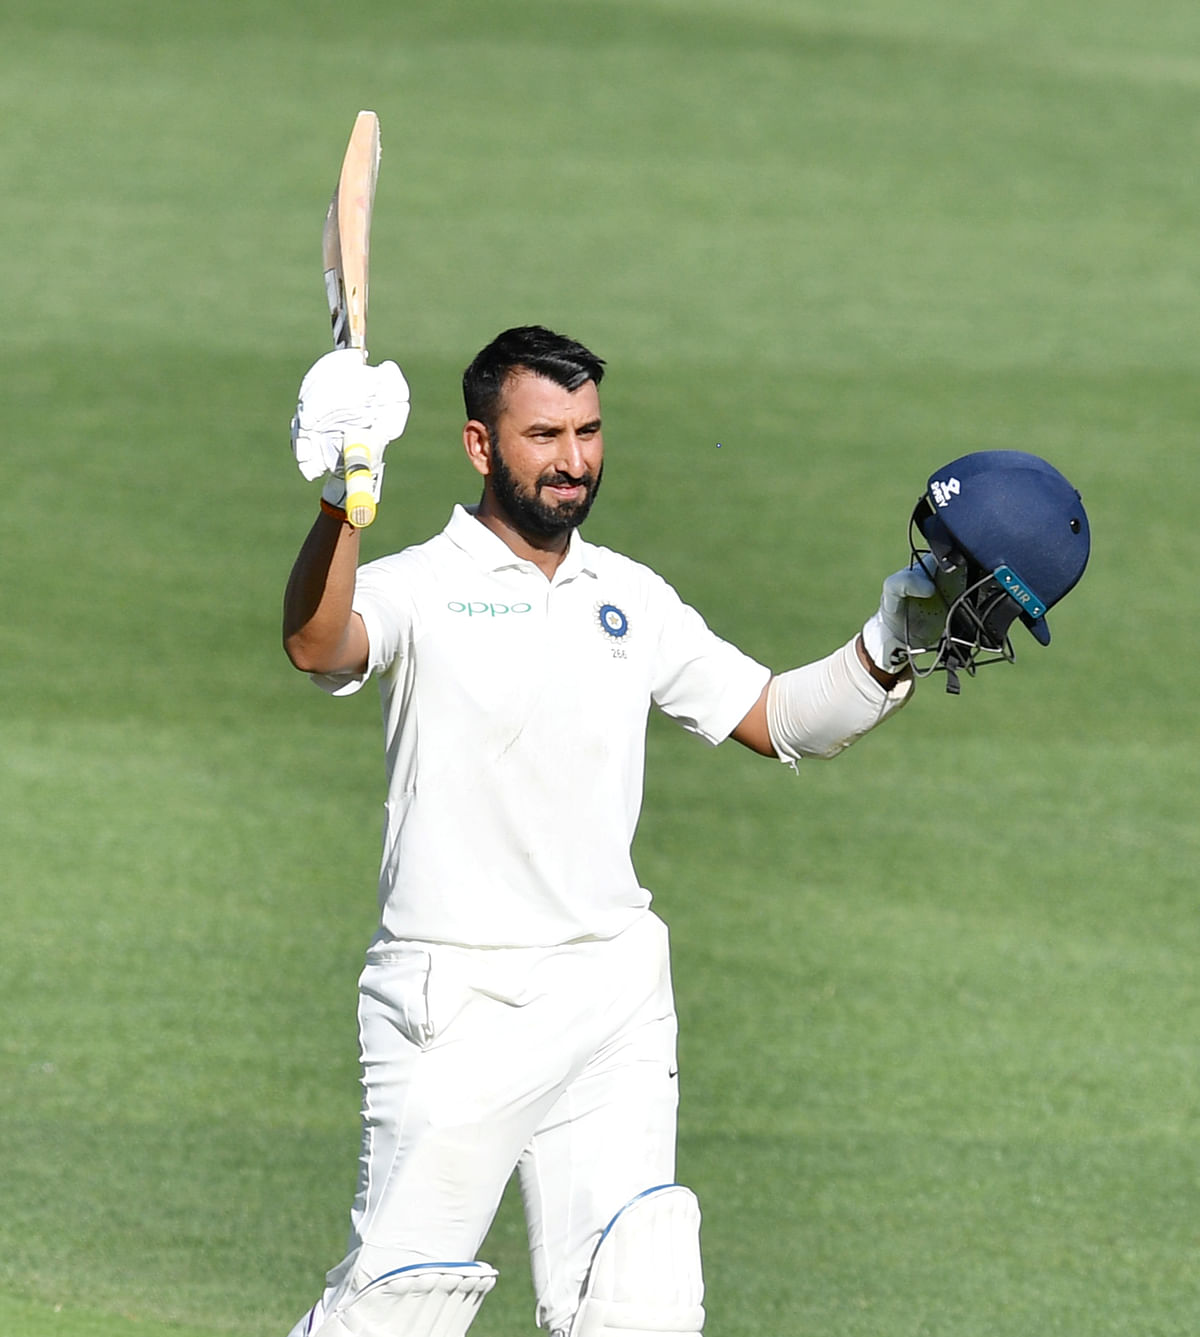 India`s Cheteshwar Pujara celebrates after scoring his century during day one of the first test match between Australia and India at the Adelaide Oval in Adelaide, Australia, on 6 December 2018. Photo: Reuters